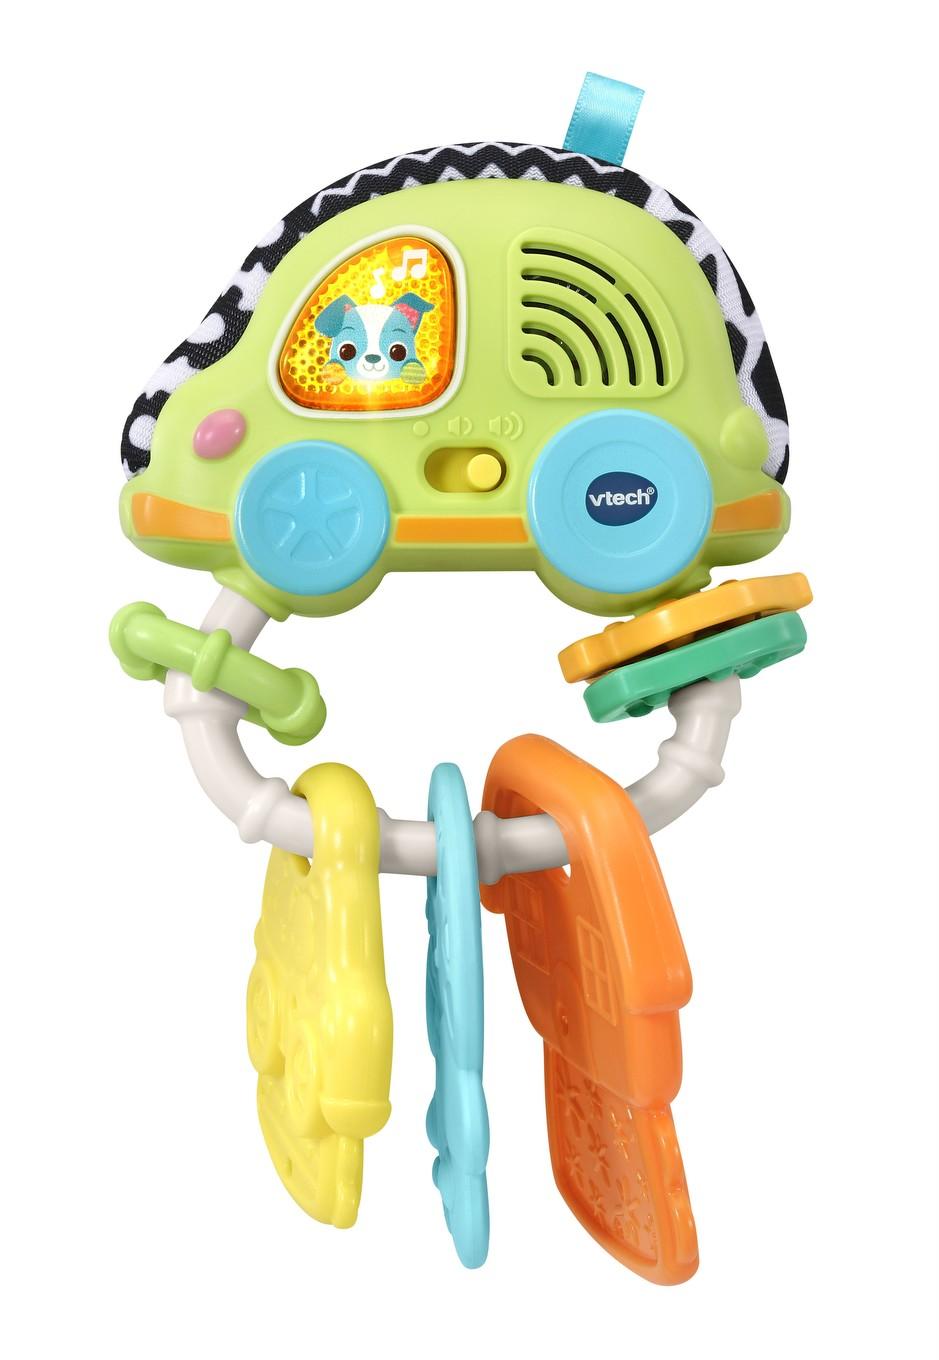 VTech® Green Means Go Baby Keys™ Teether Toy for Babies and Toddlers